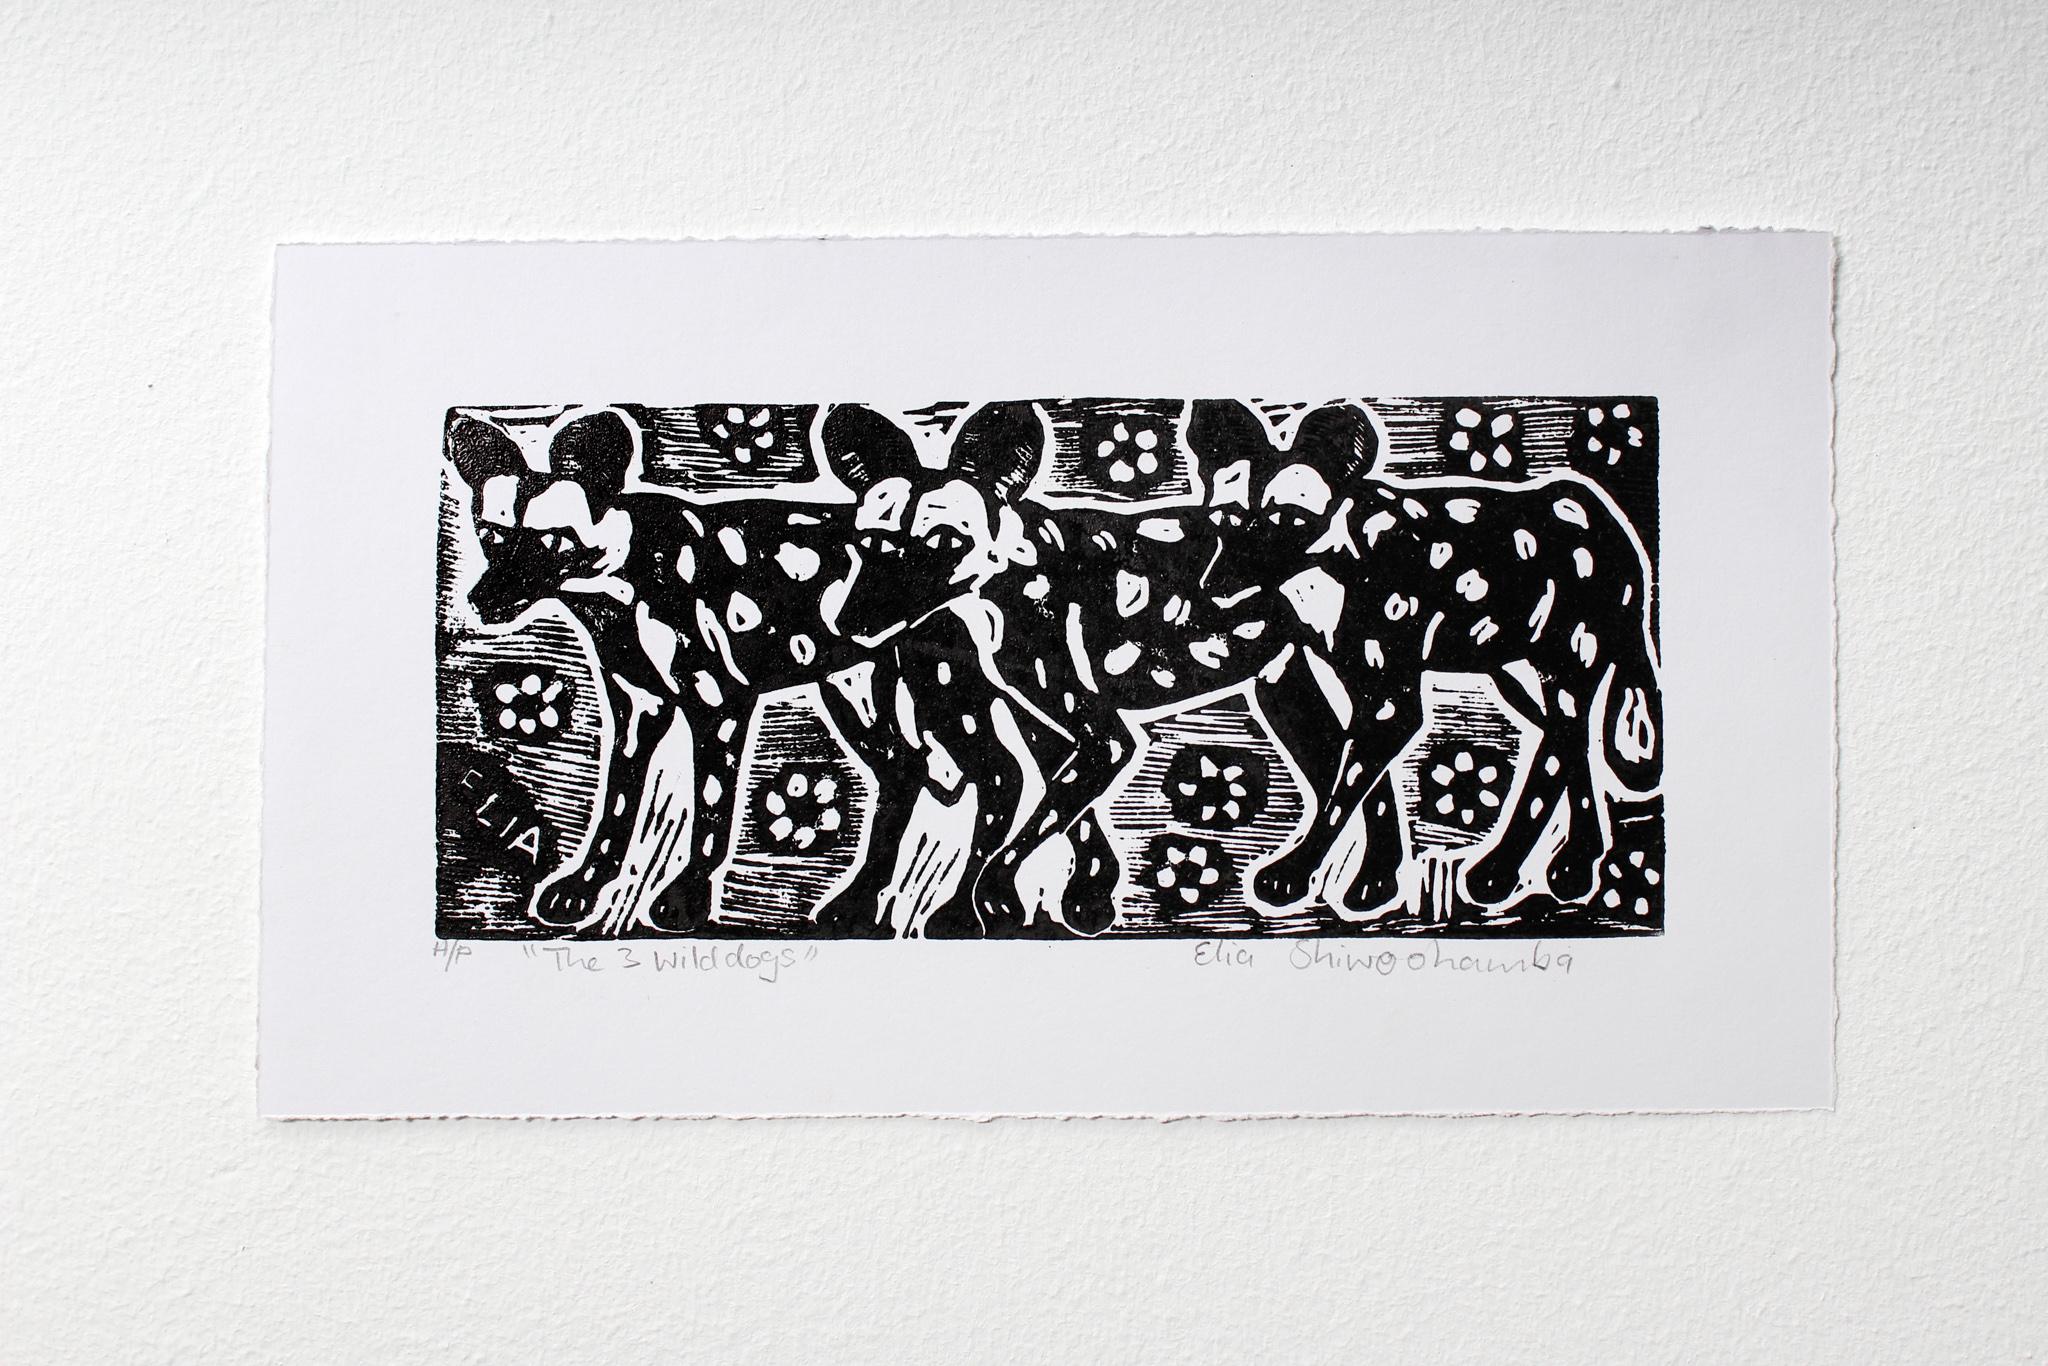 The 3 Wild Dogs, undated. Linoleum block print on paper. Unlimited Edition

Elia Shiwoohamba was born in 1981 in Windhoek, Namibia. He graduated from the John Muafangejo Art Centre in Windhoek in 2006. Specialising in printmaking and sculpture,